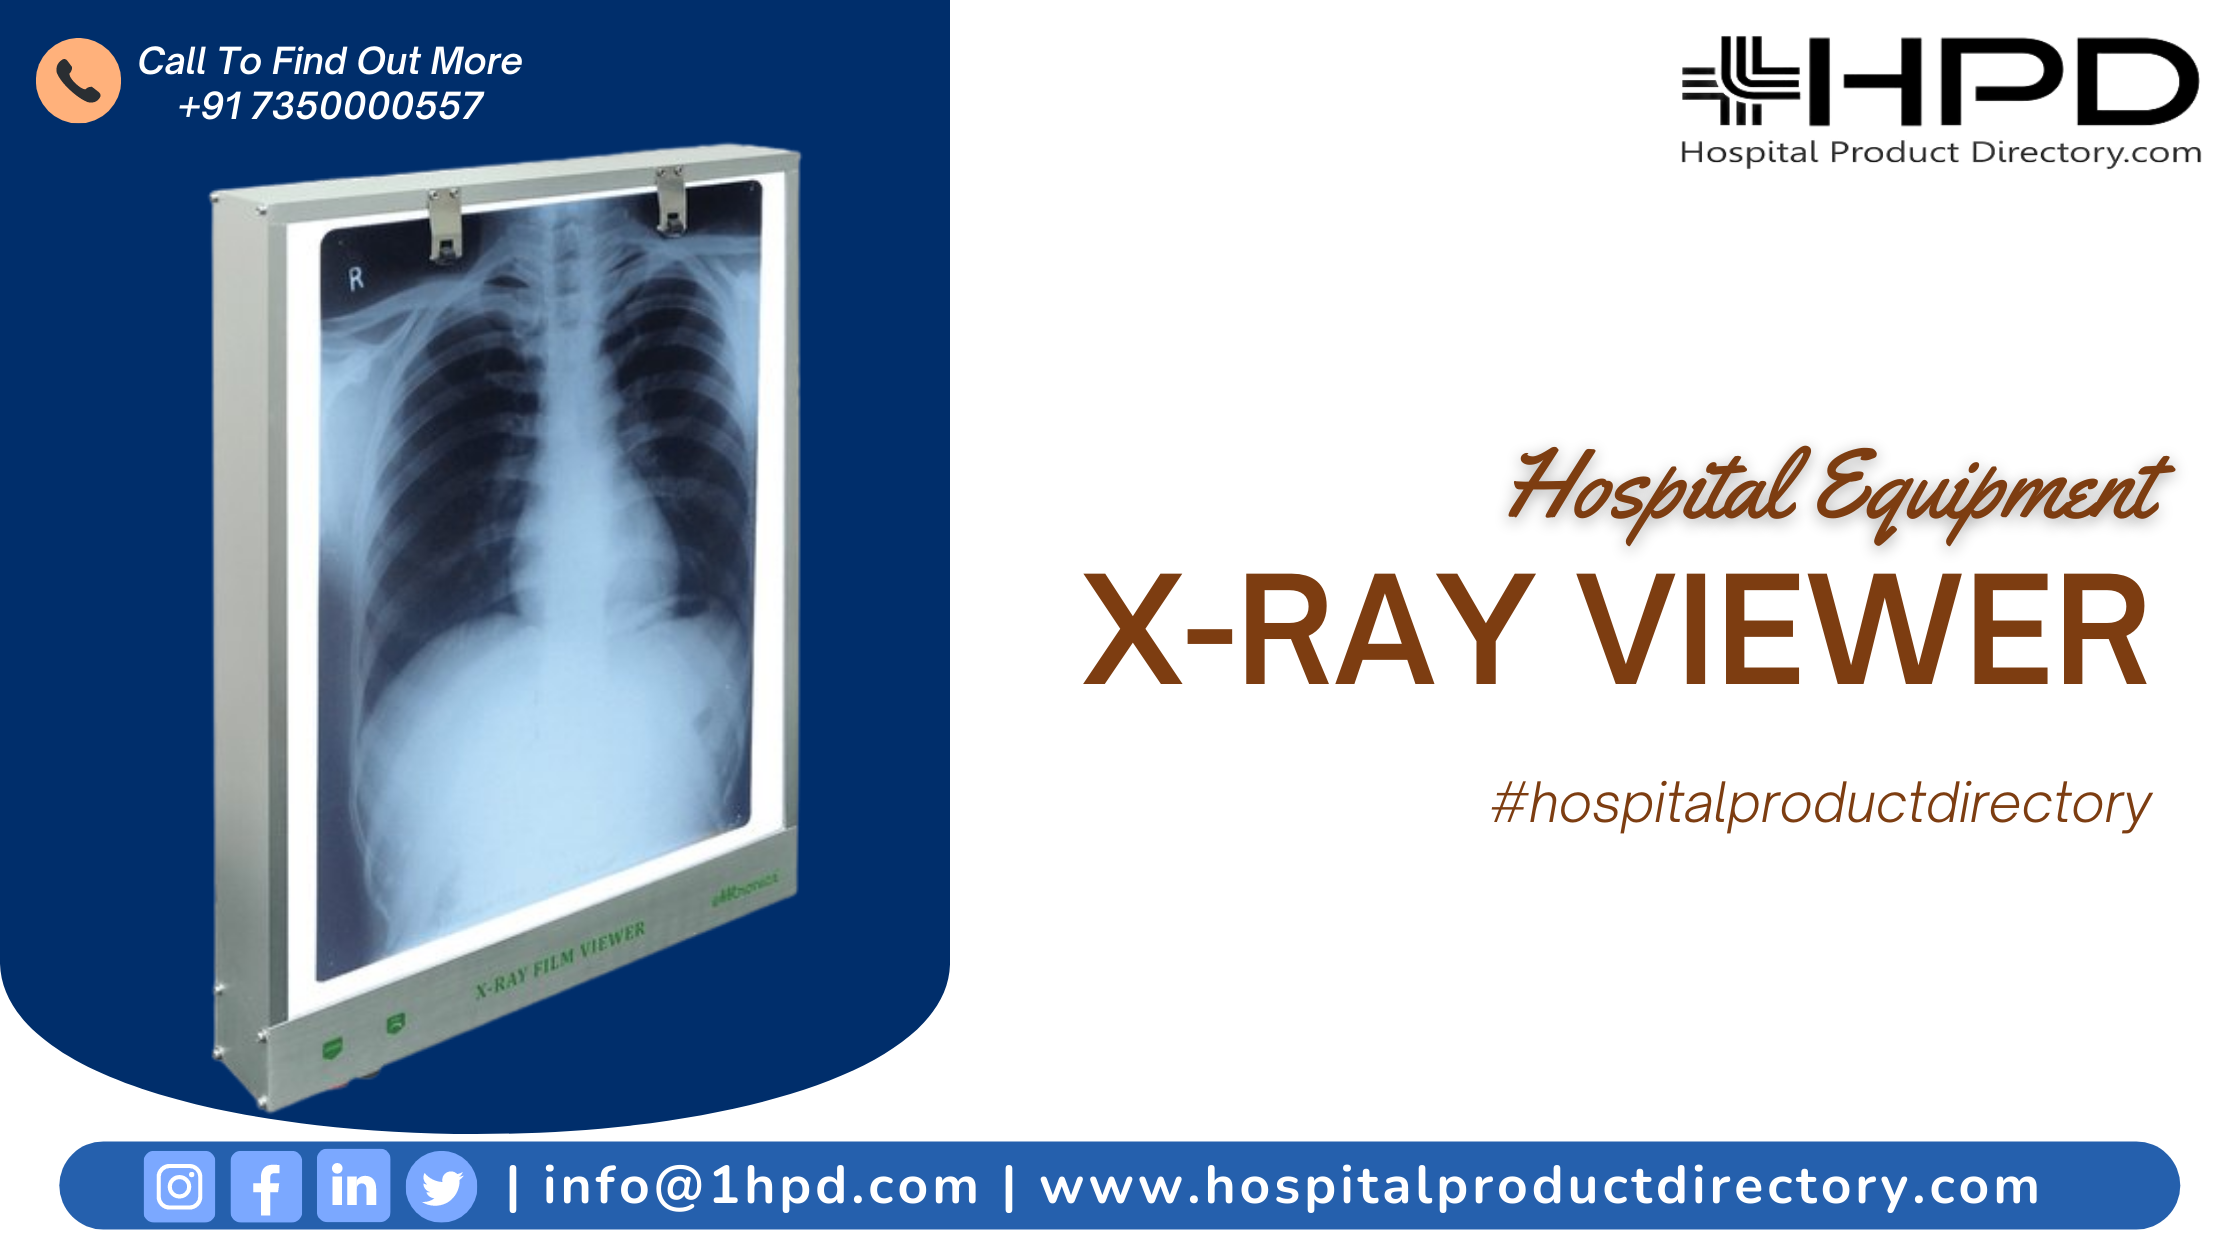 xray viewer suppliers and xray viewer manufacturers information